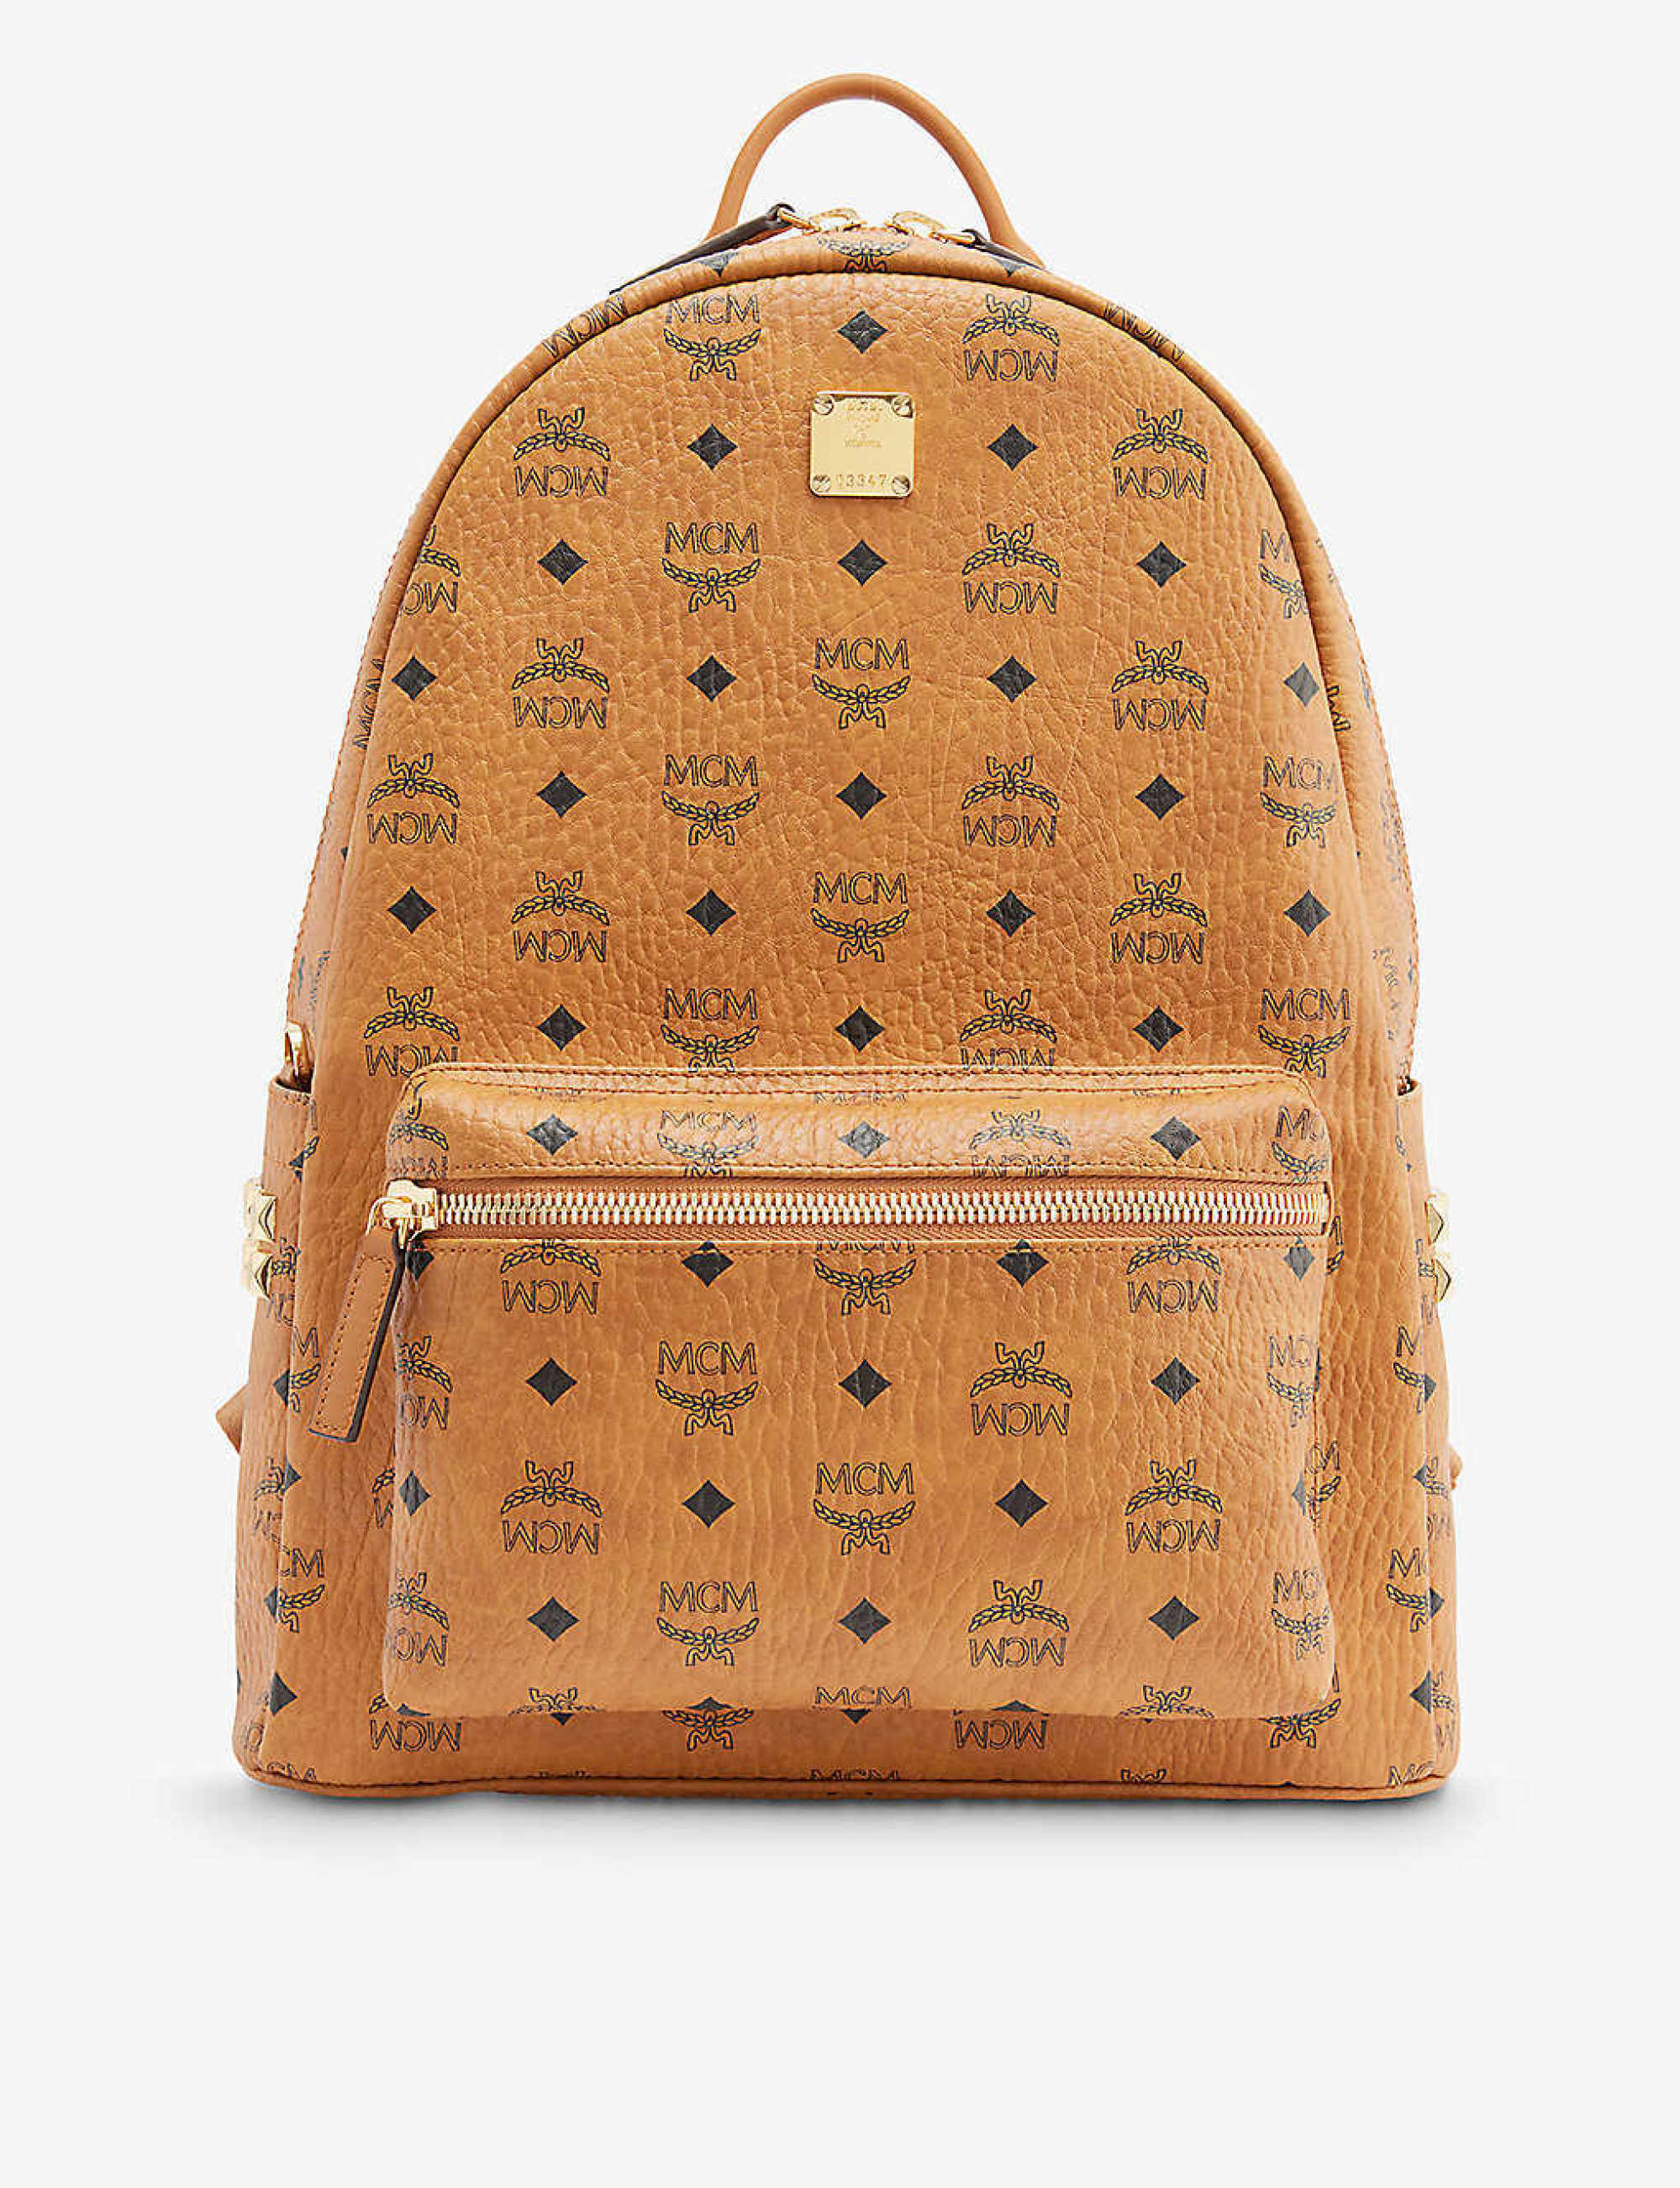 mcm logo - Google Search Just like the trademark brown leather